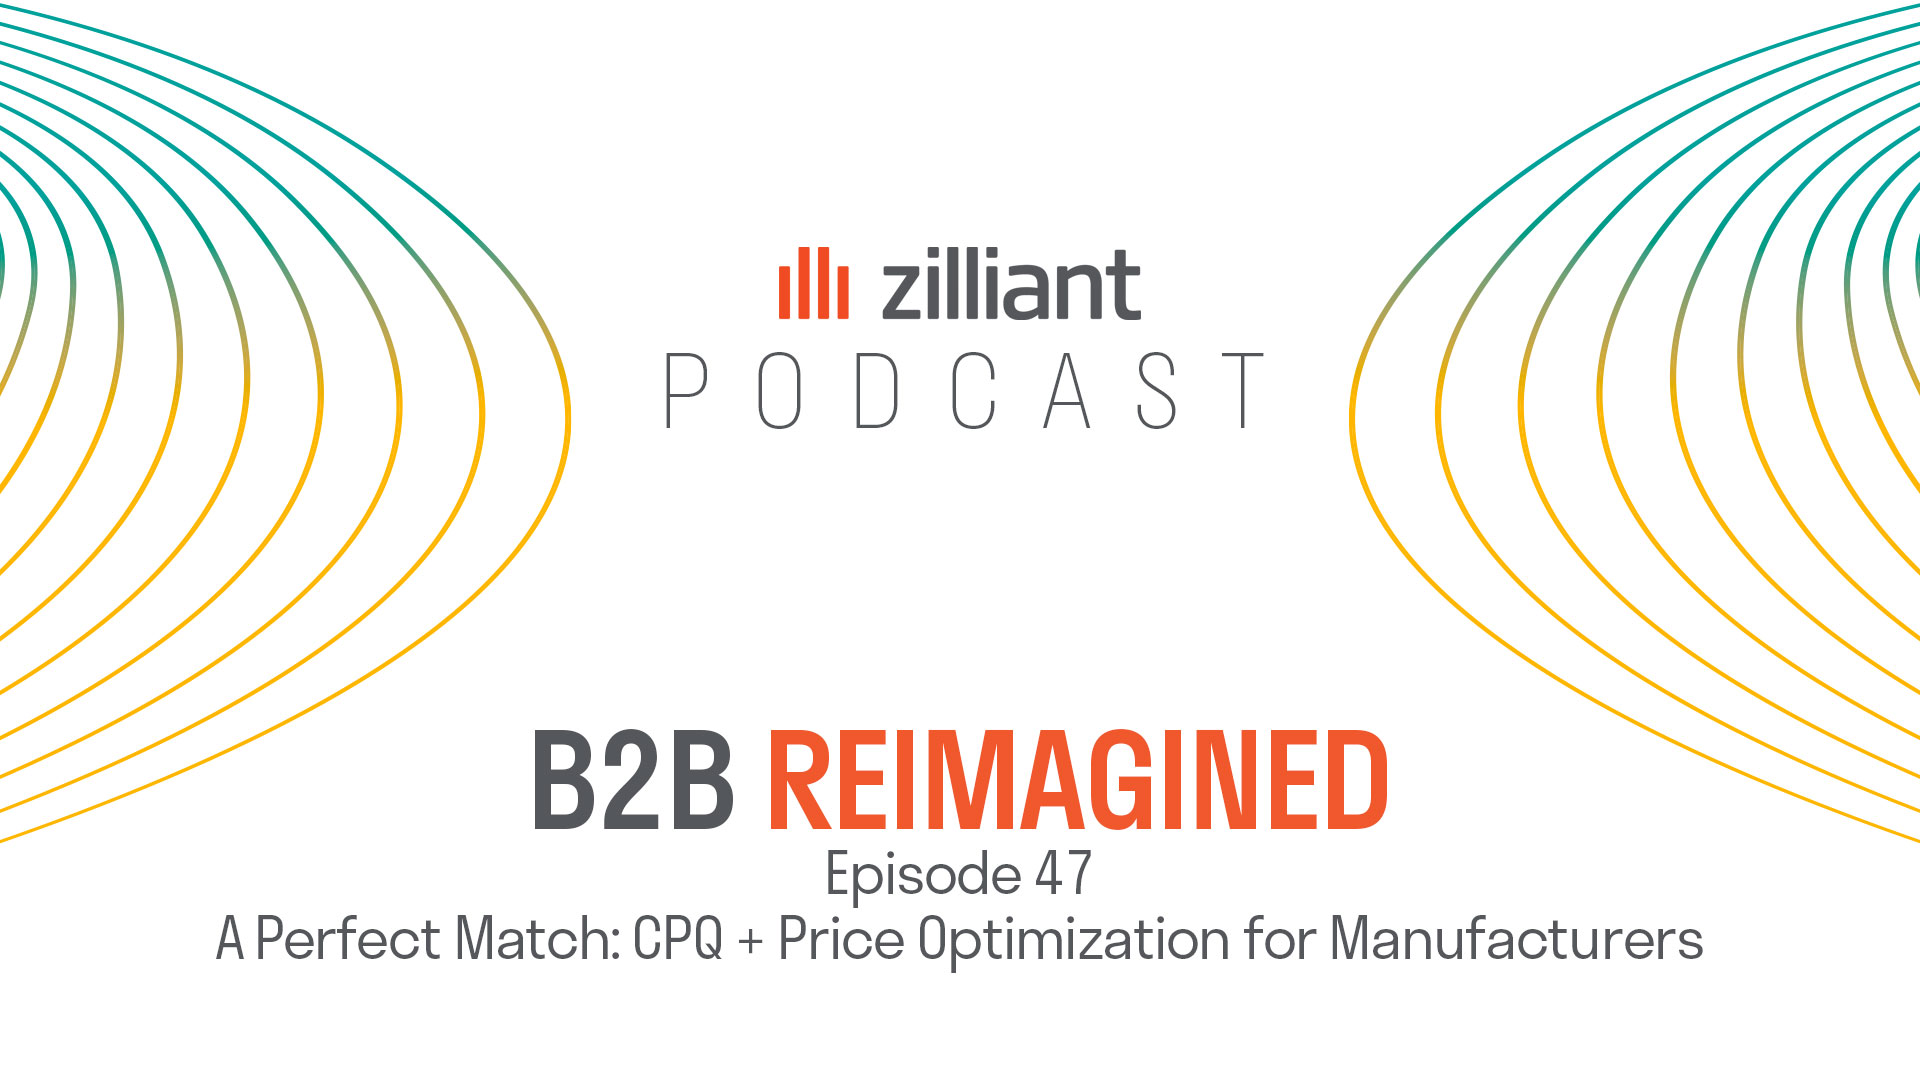 A Perfect Match: CPQ + Price Optimization for Manufacturers